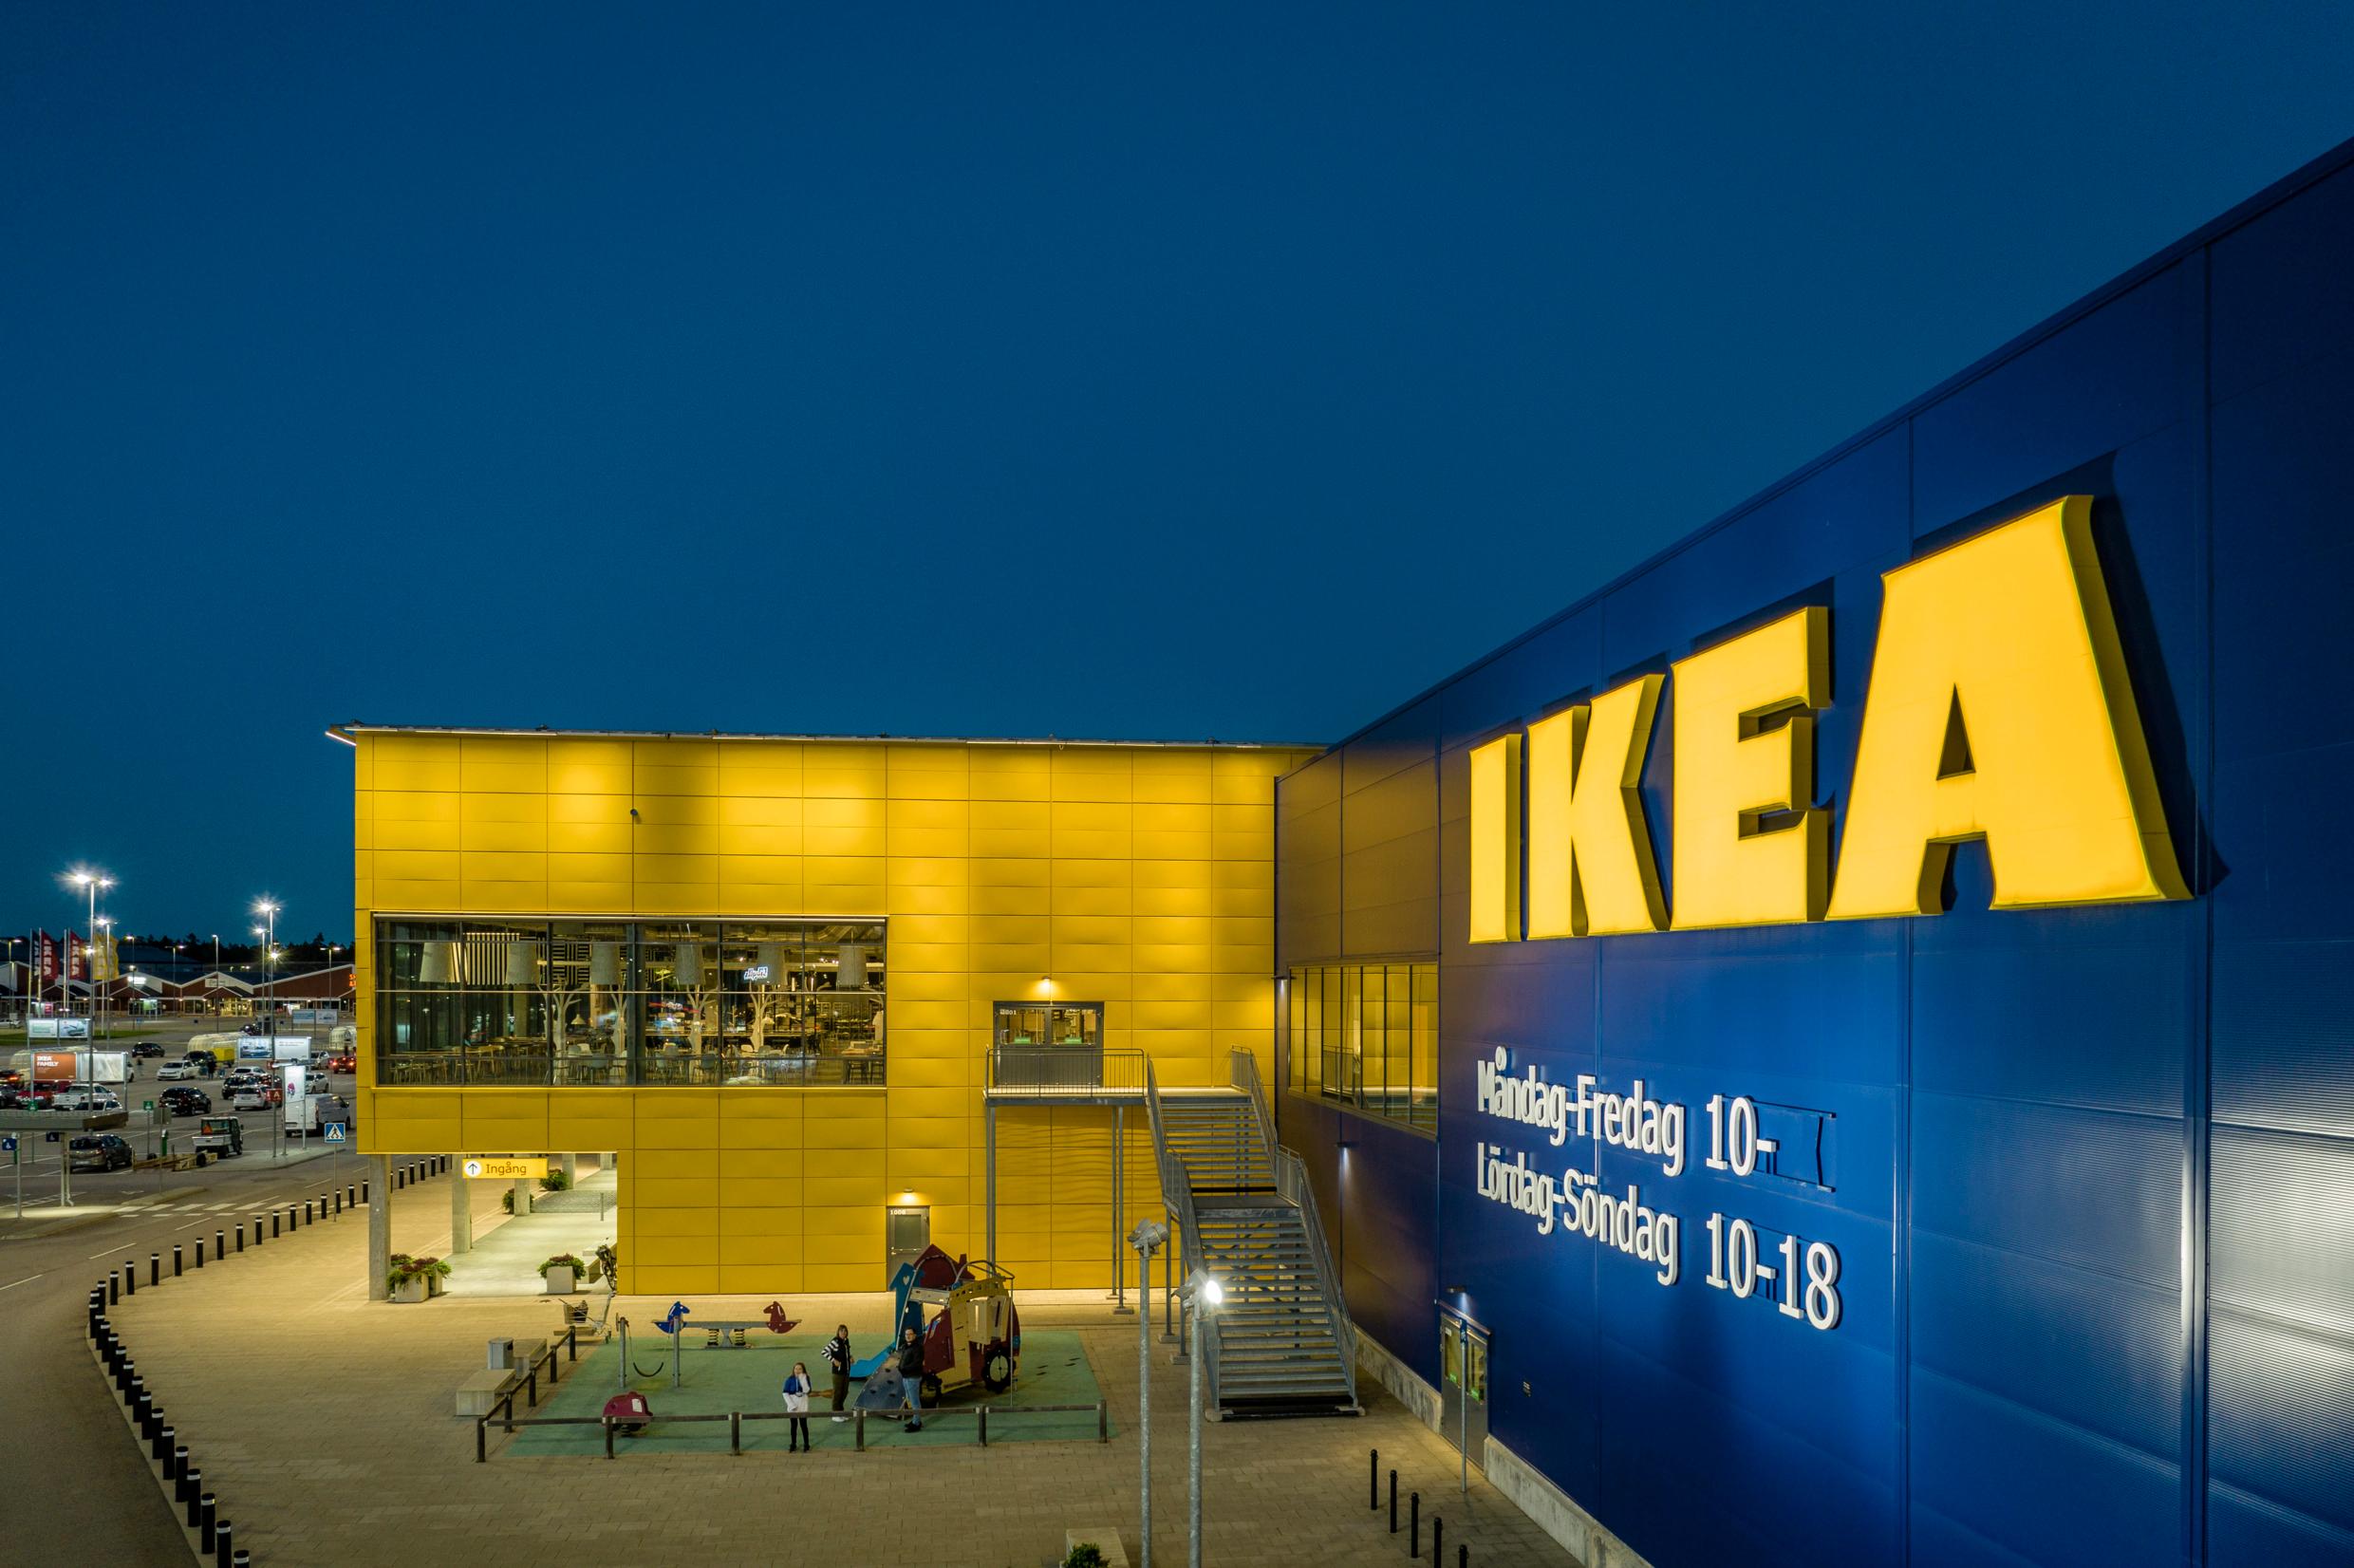 A large building in blue and yellow with IKEA written on it.